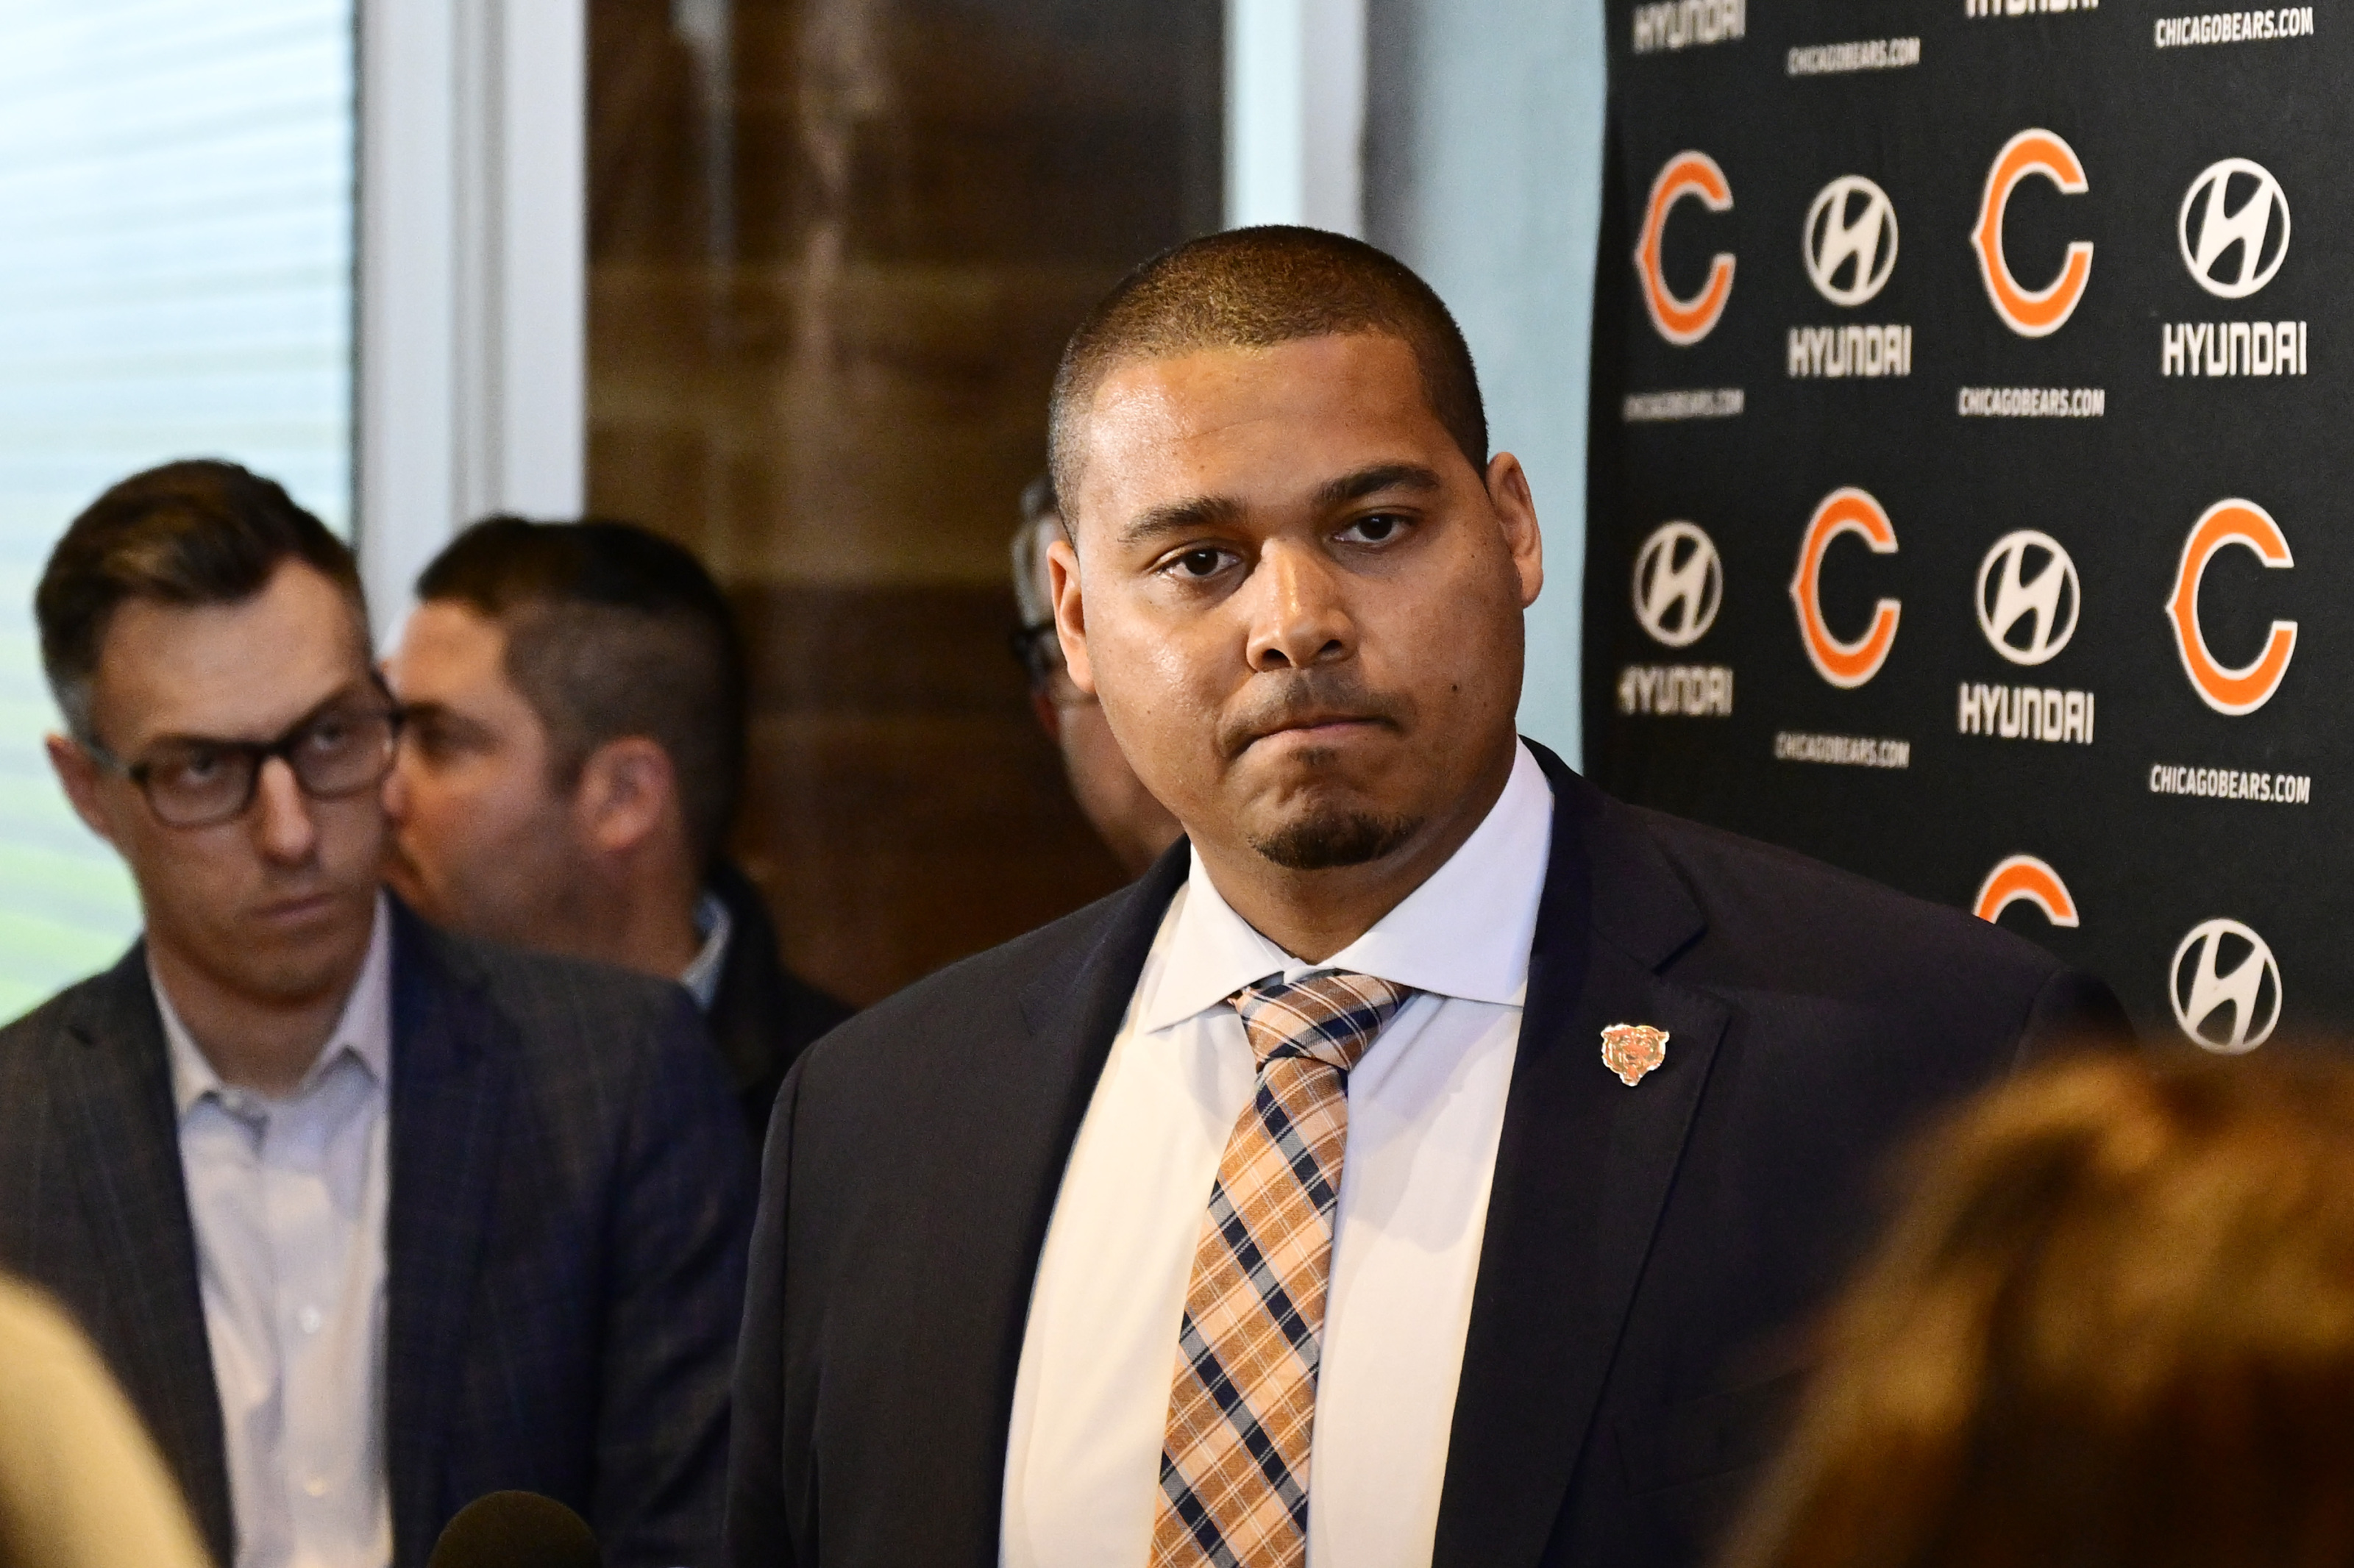 3 more moves Chicago Bears general manager Ryan Poles should make